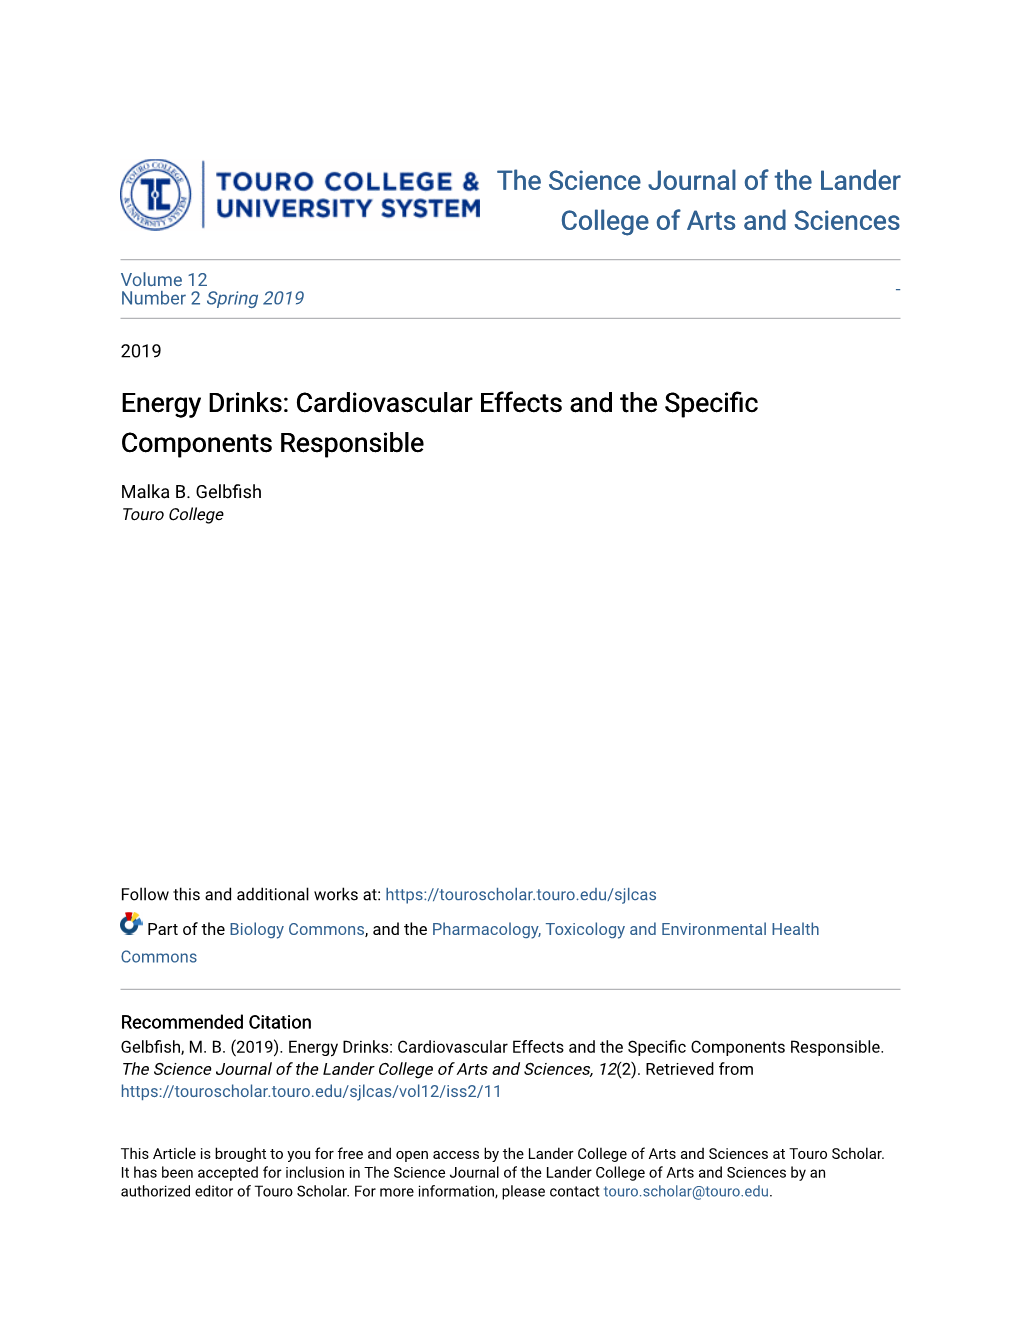 Energy Drinks: Cardiovascular Effects and the Specific Components Responsible